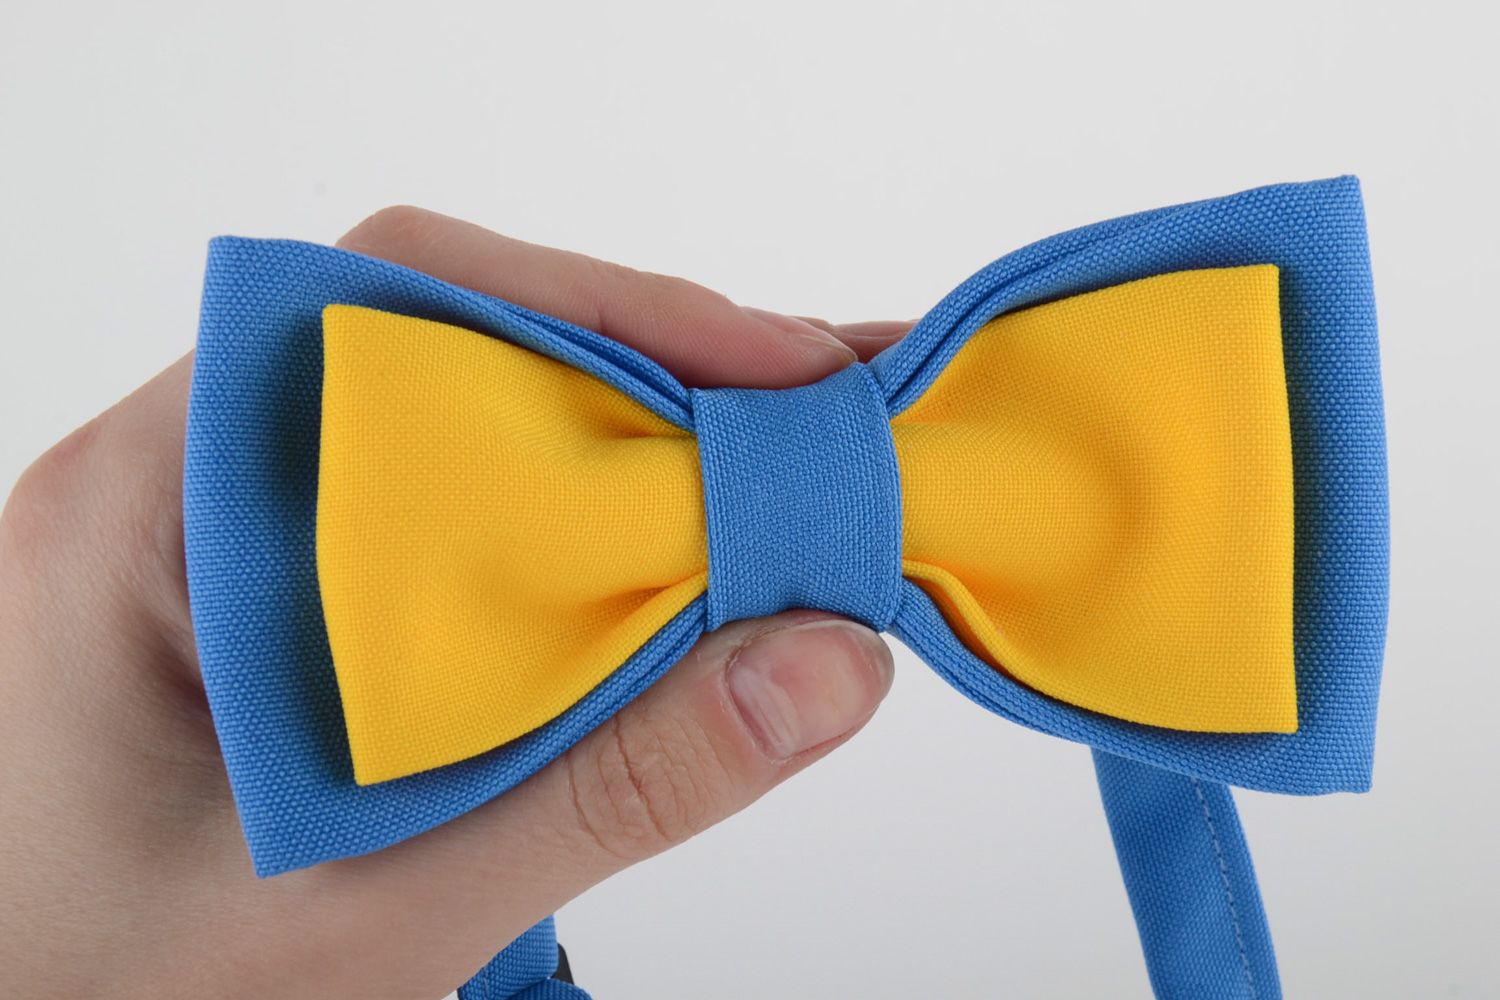 Handmade bow tie sewn of costume fabric in contrast combination of blue and yellow photo 5